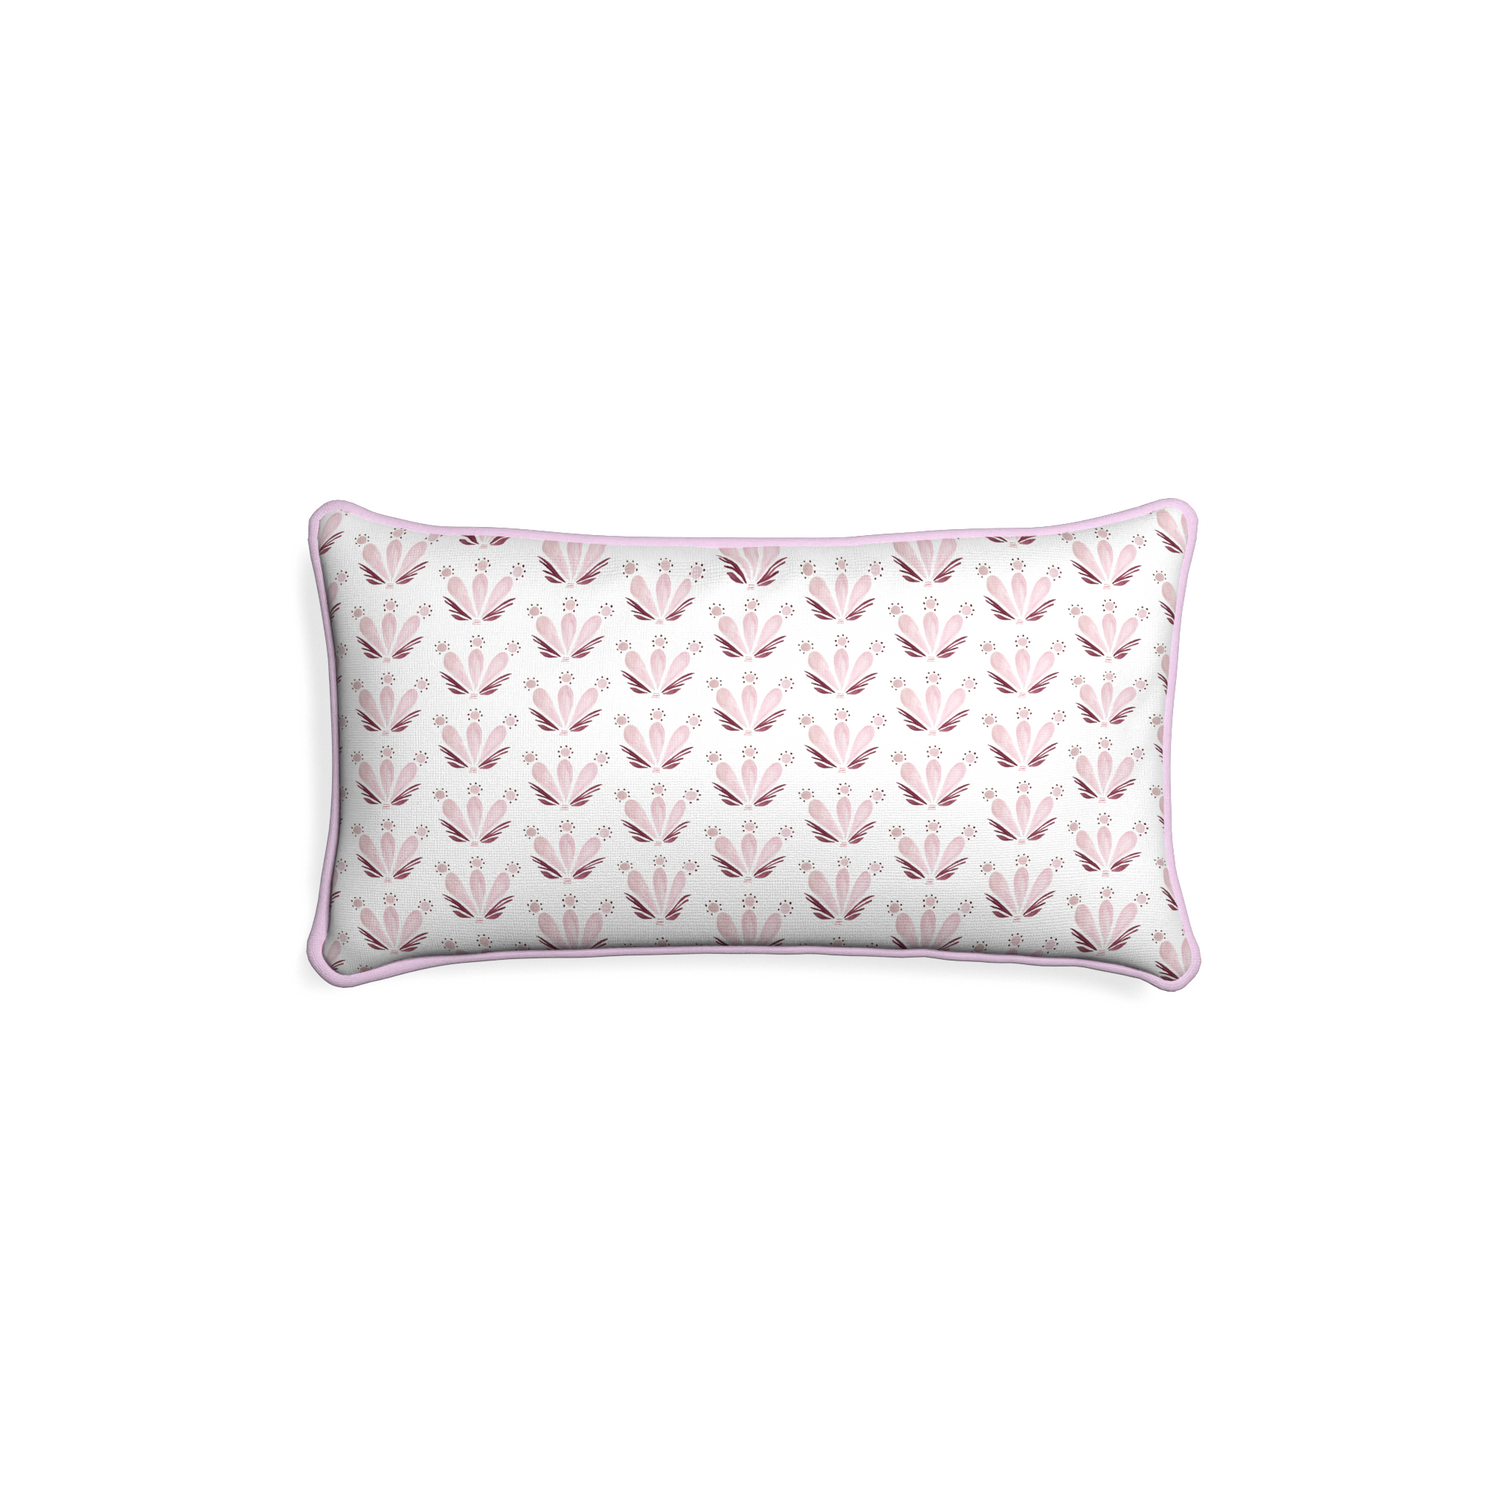 Petite-lumbar serena pink custom pink & burgundy drop repeat floralpillow with l piping on white background